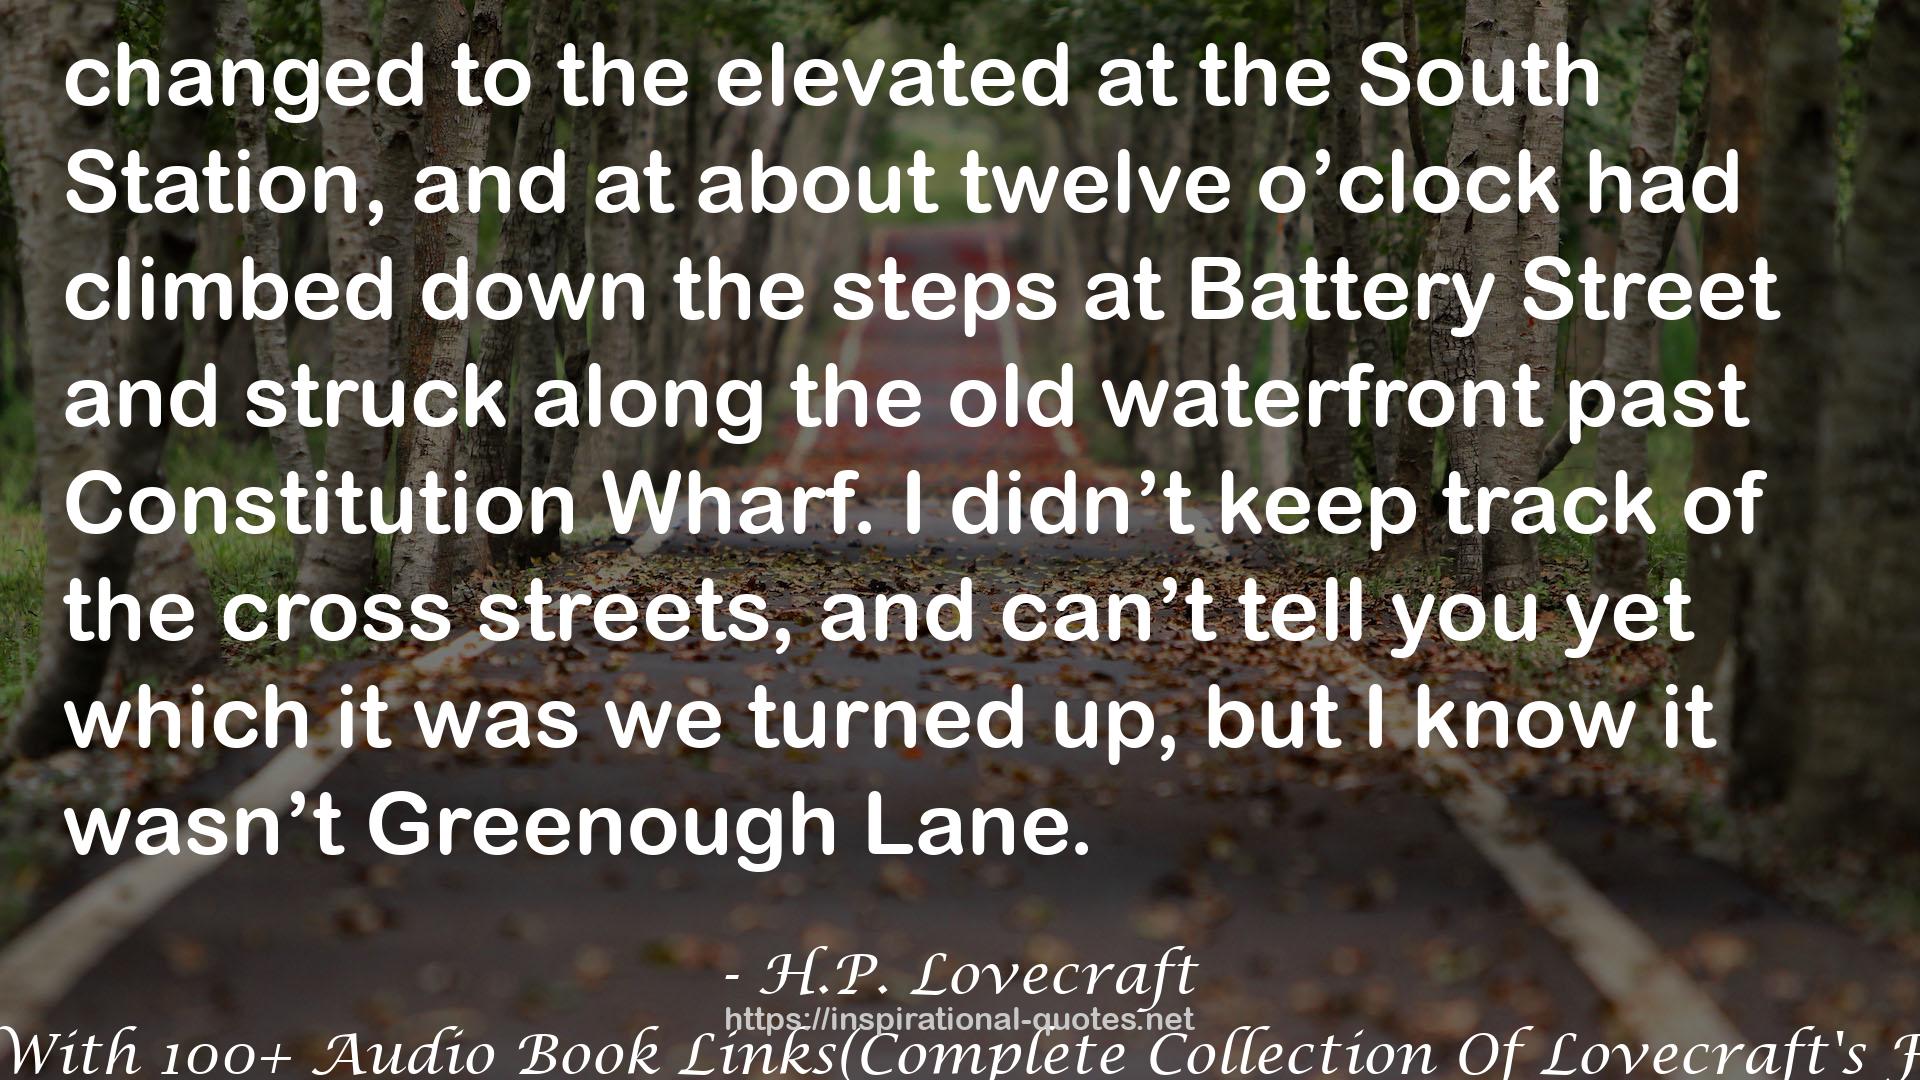 Complete Collection Of H.P.Lovecraft - 150 eBooks With 100+ Audio Book Links(Complete Collection Of Lovecraft's Fiction,Juvenilia,Poems,Essays And Collaborations) QUOTES